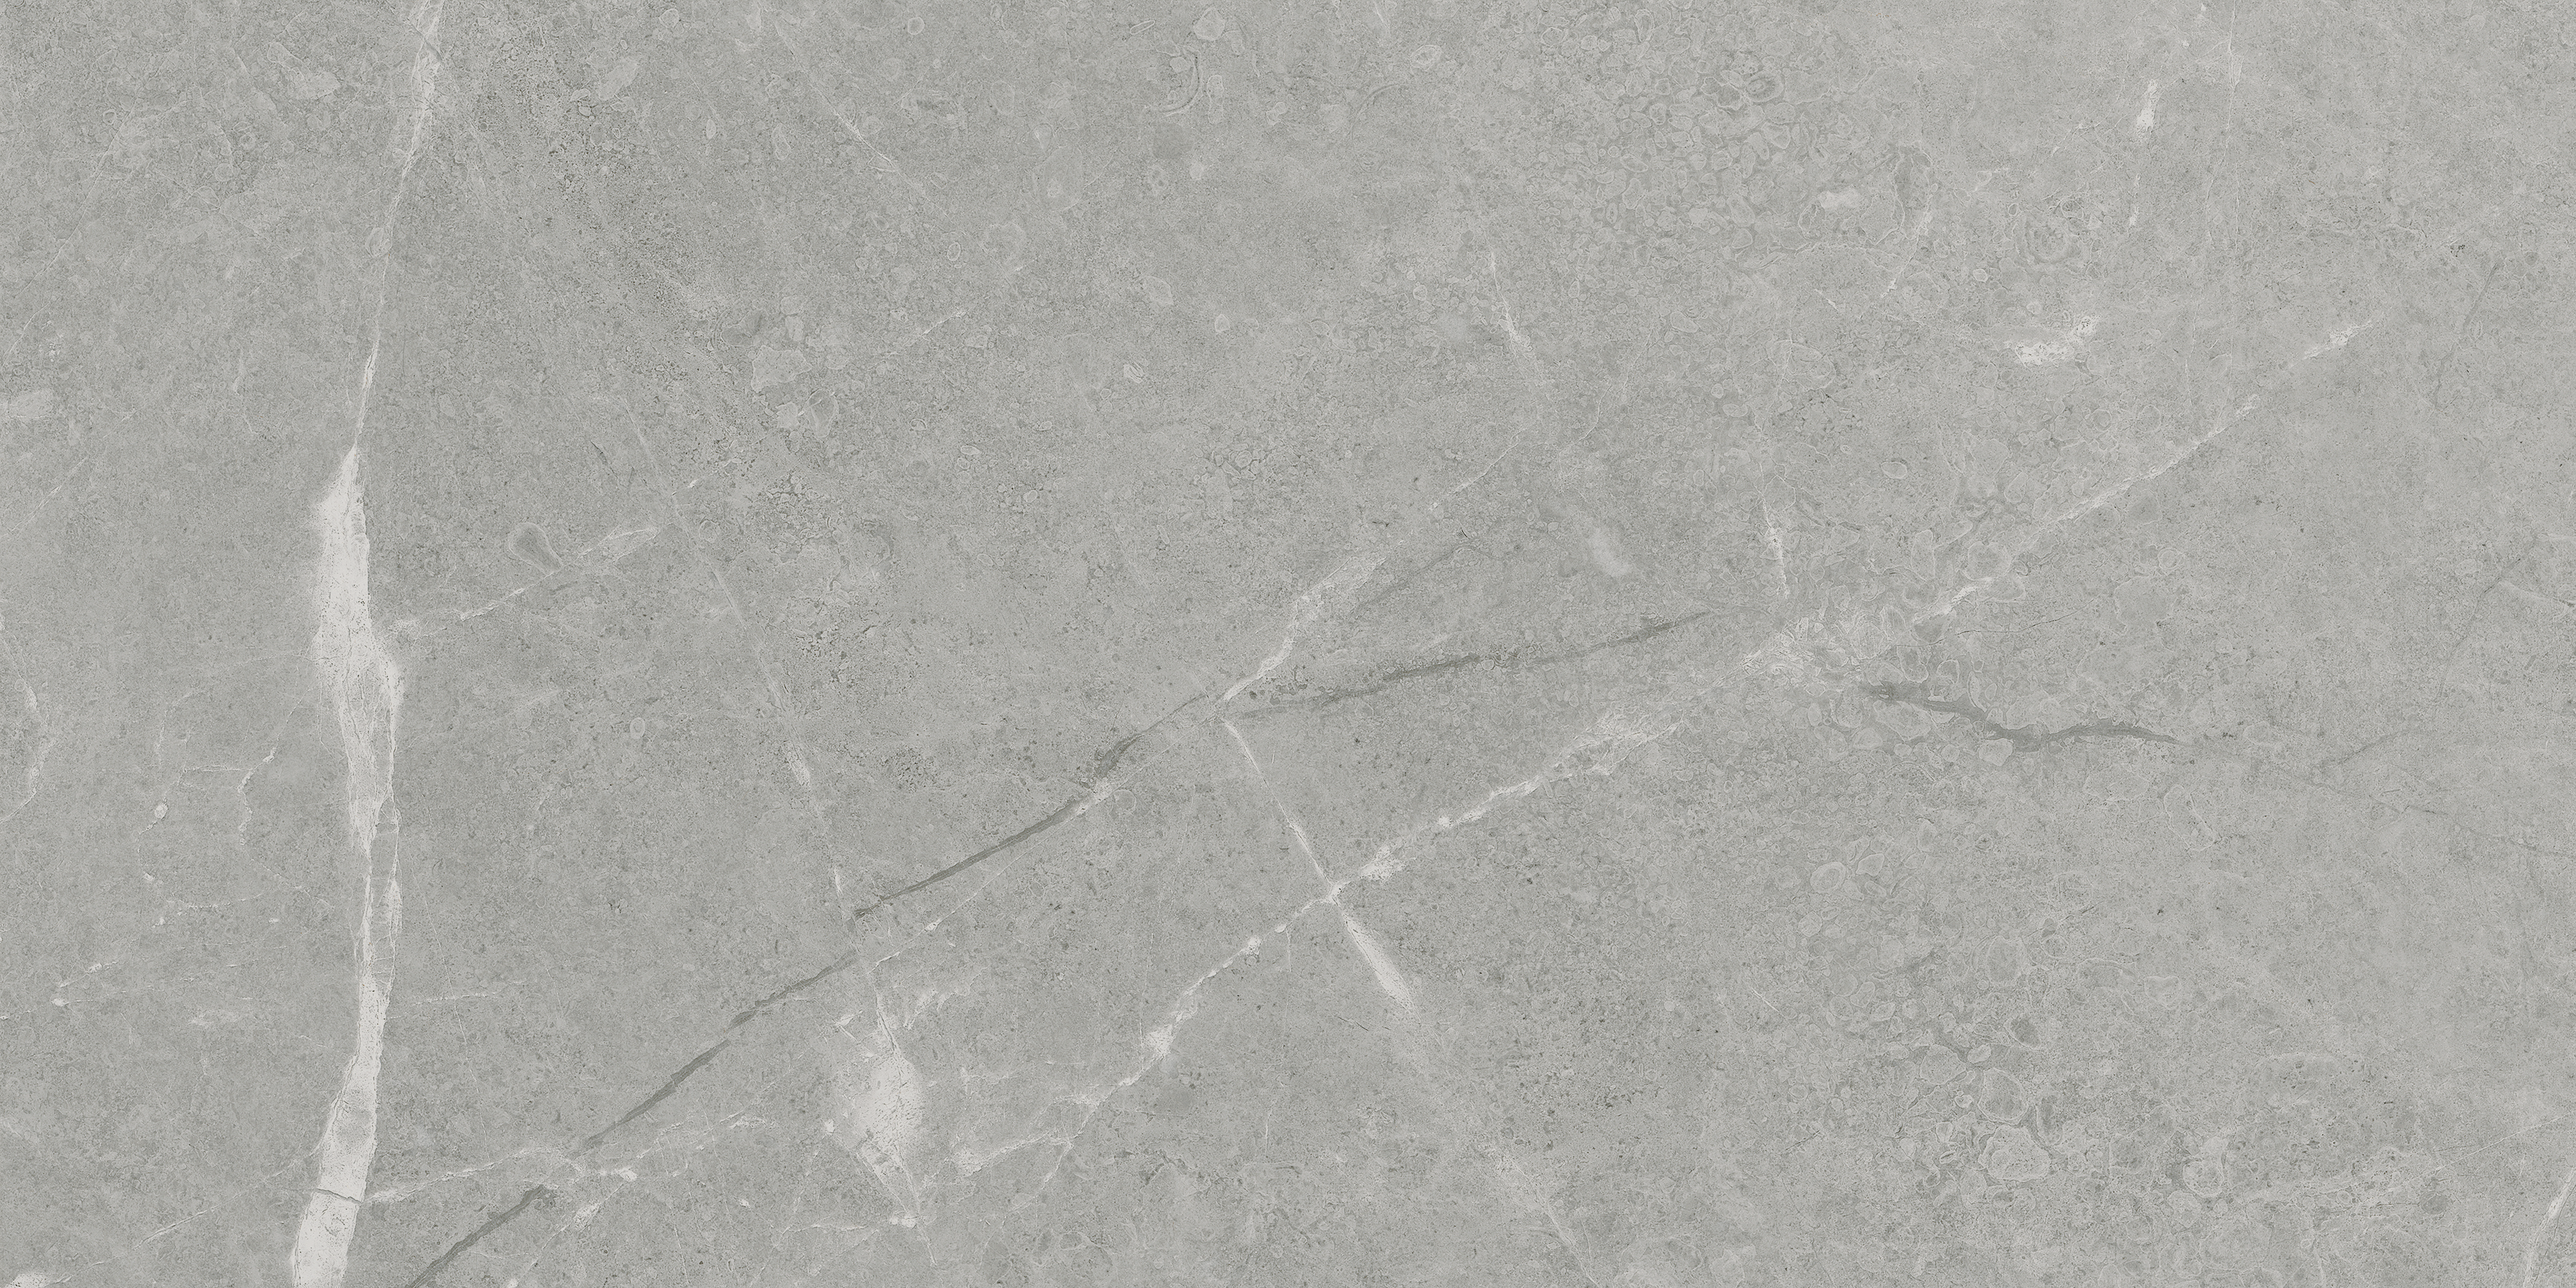 argento pattern glazed porcelain field tile from torino anatolia collection distributed by surface group international matte finish pressed edge 12x24 rectangle shape